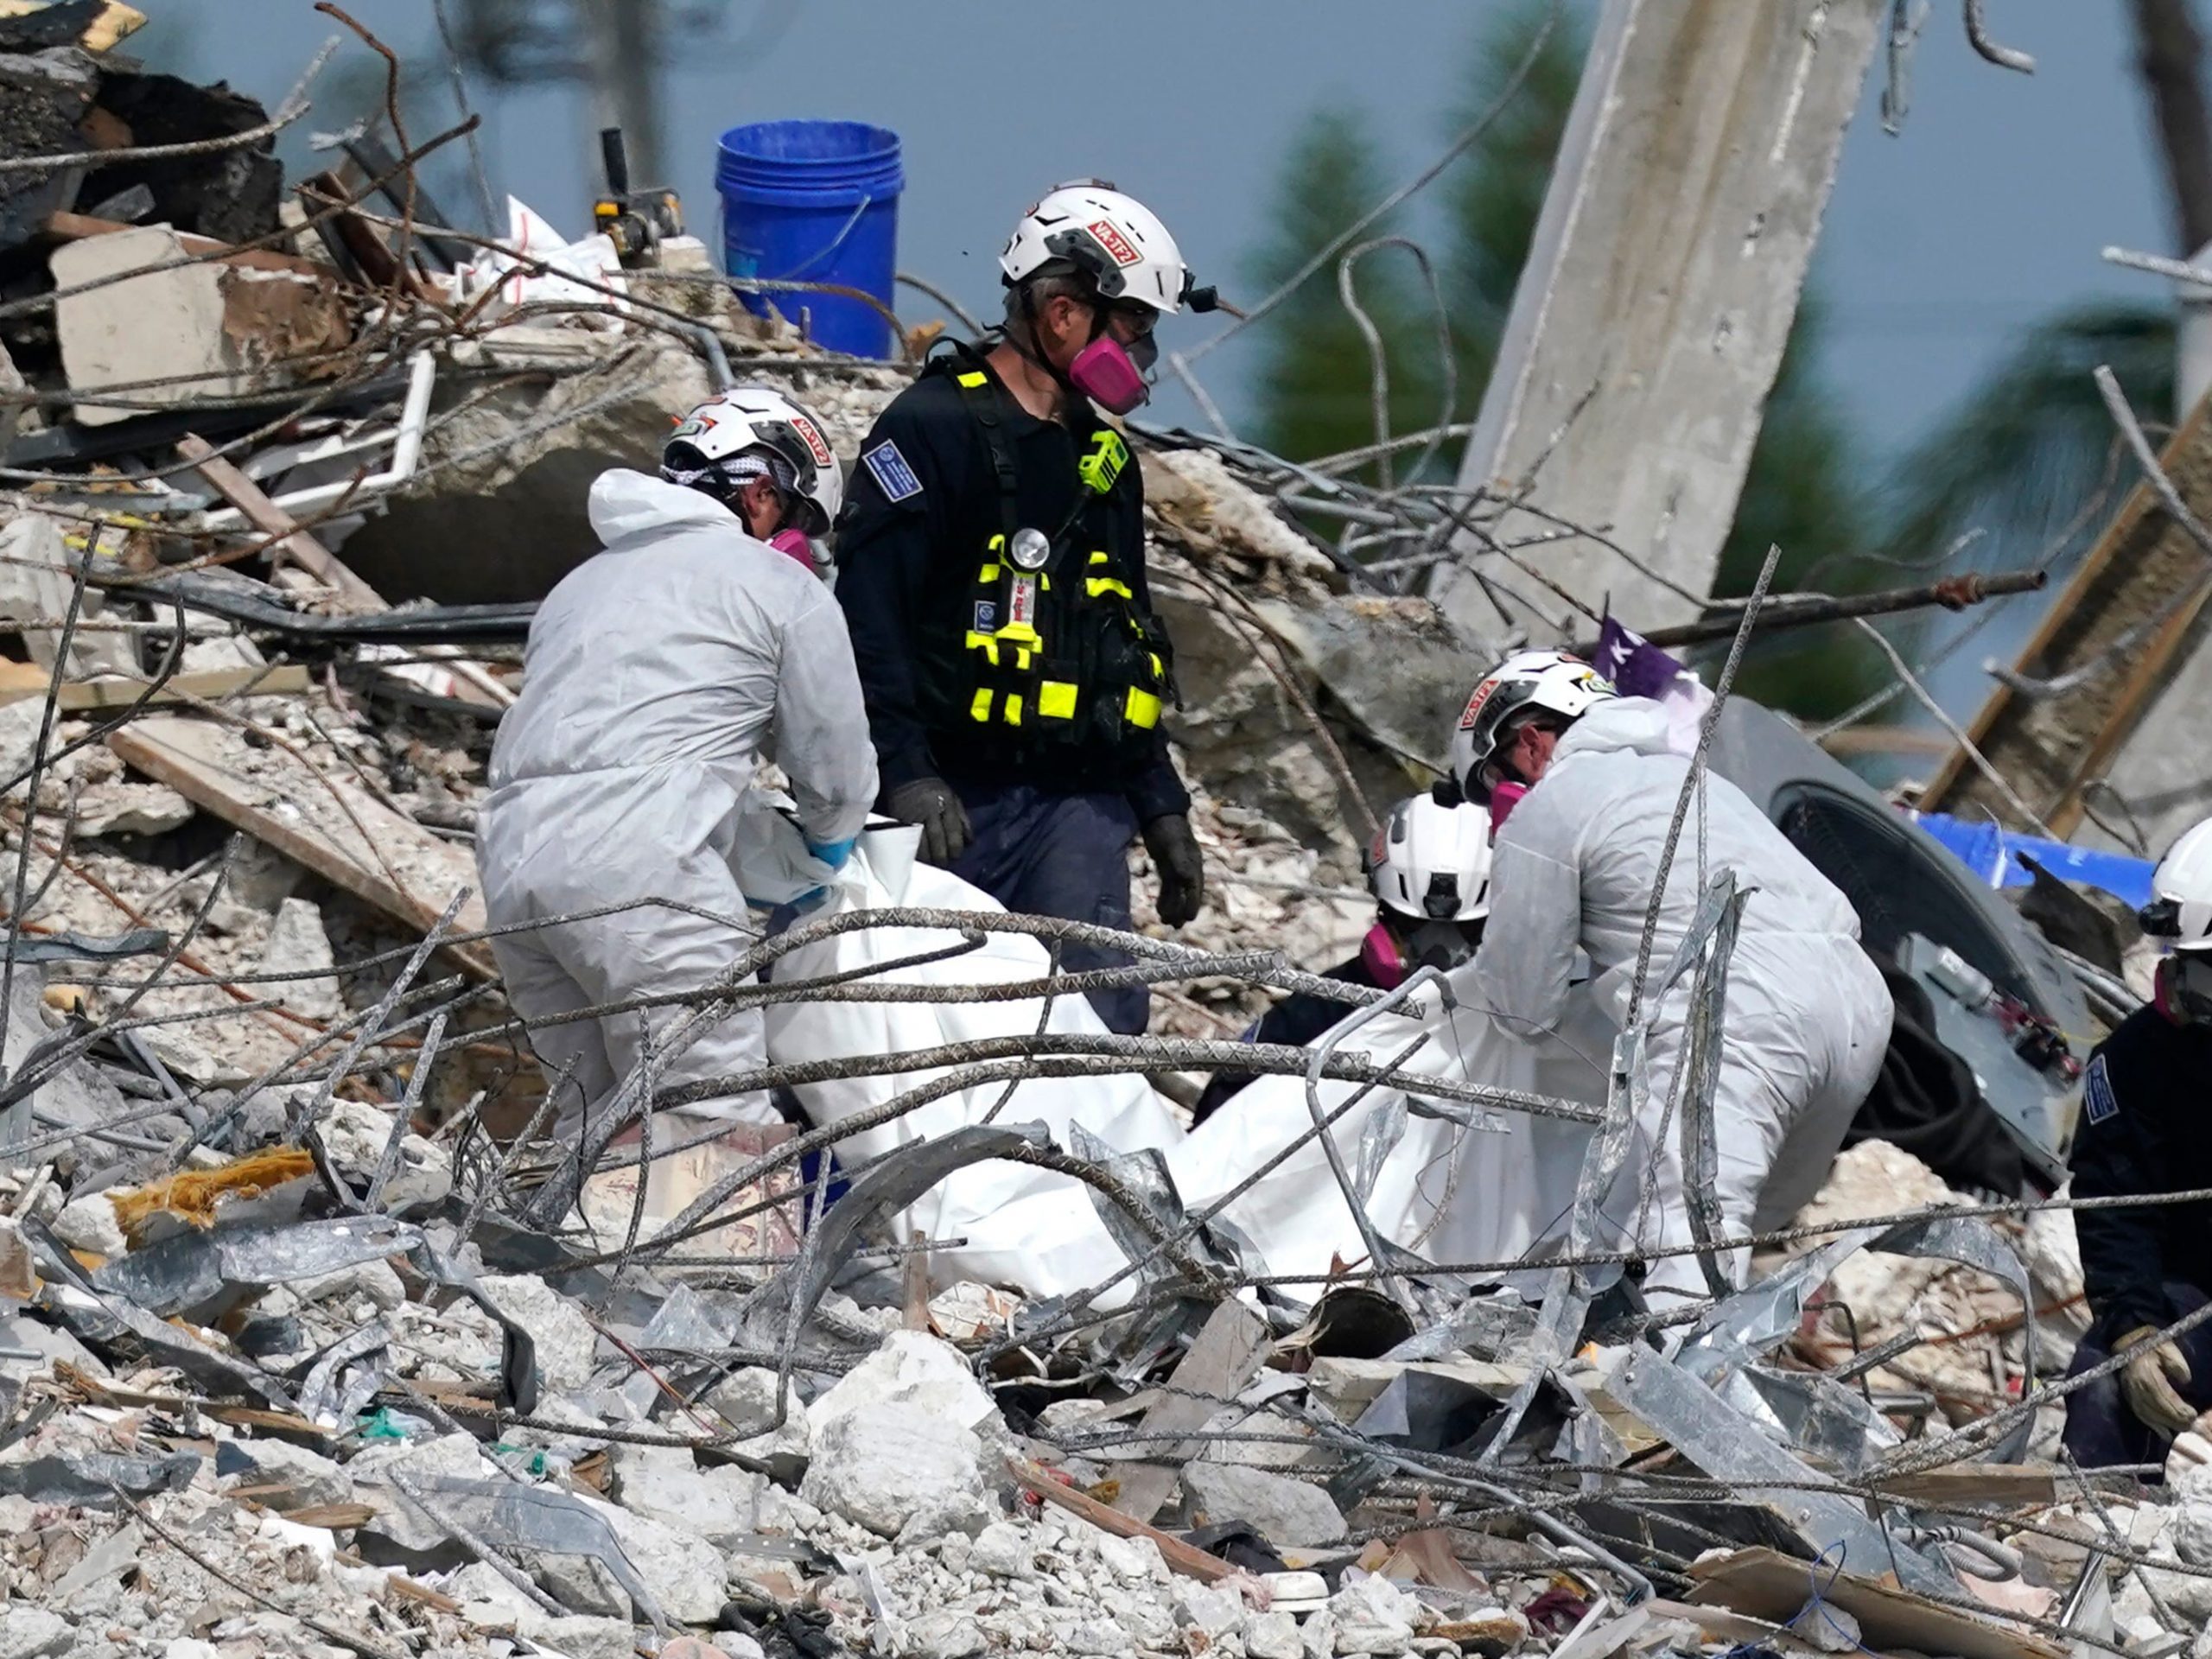 Rescue workers use a tarp for recovered remains at the site of the collapsed Champlain Towers South condo building.